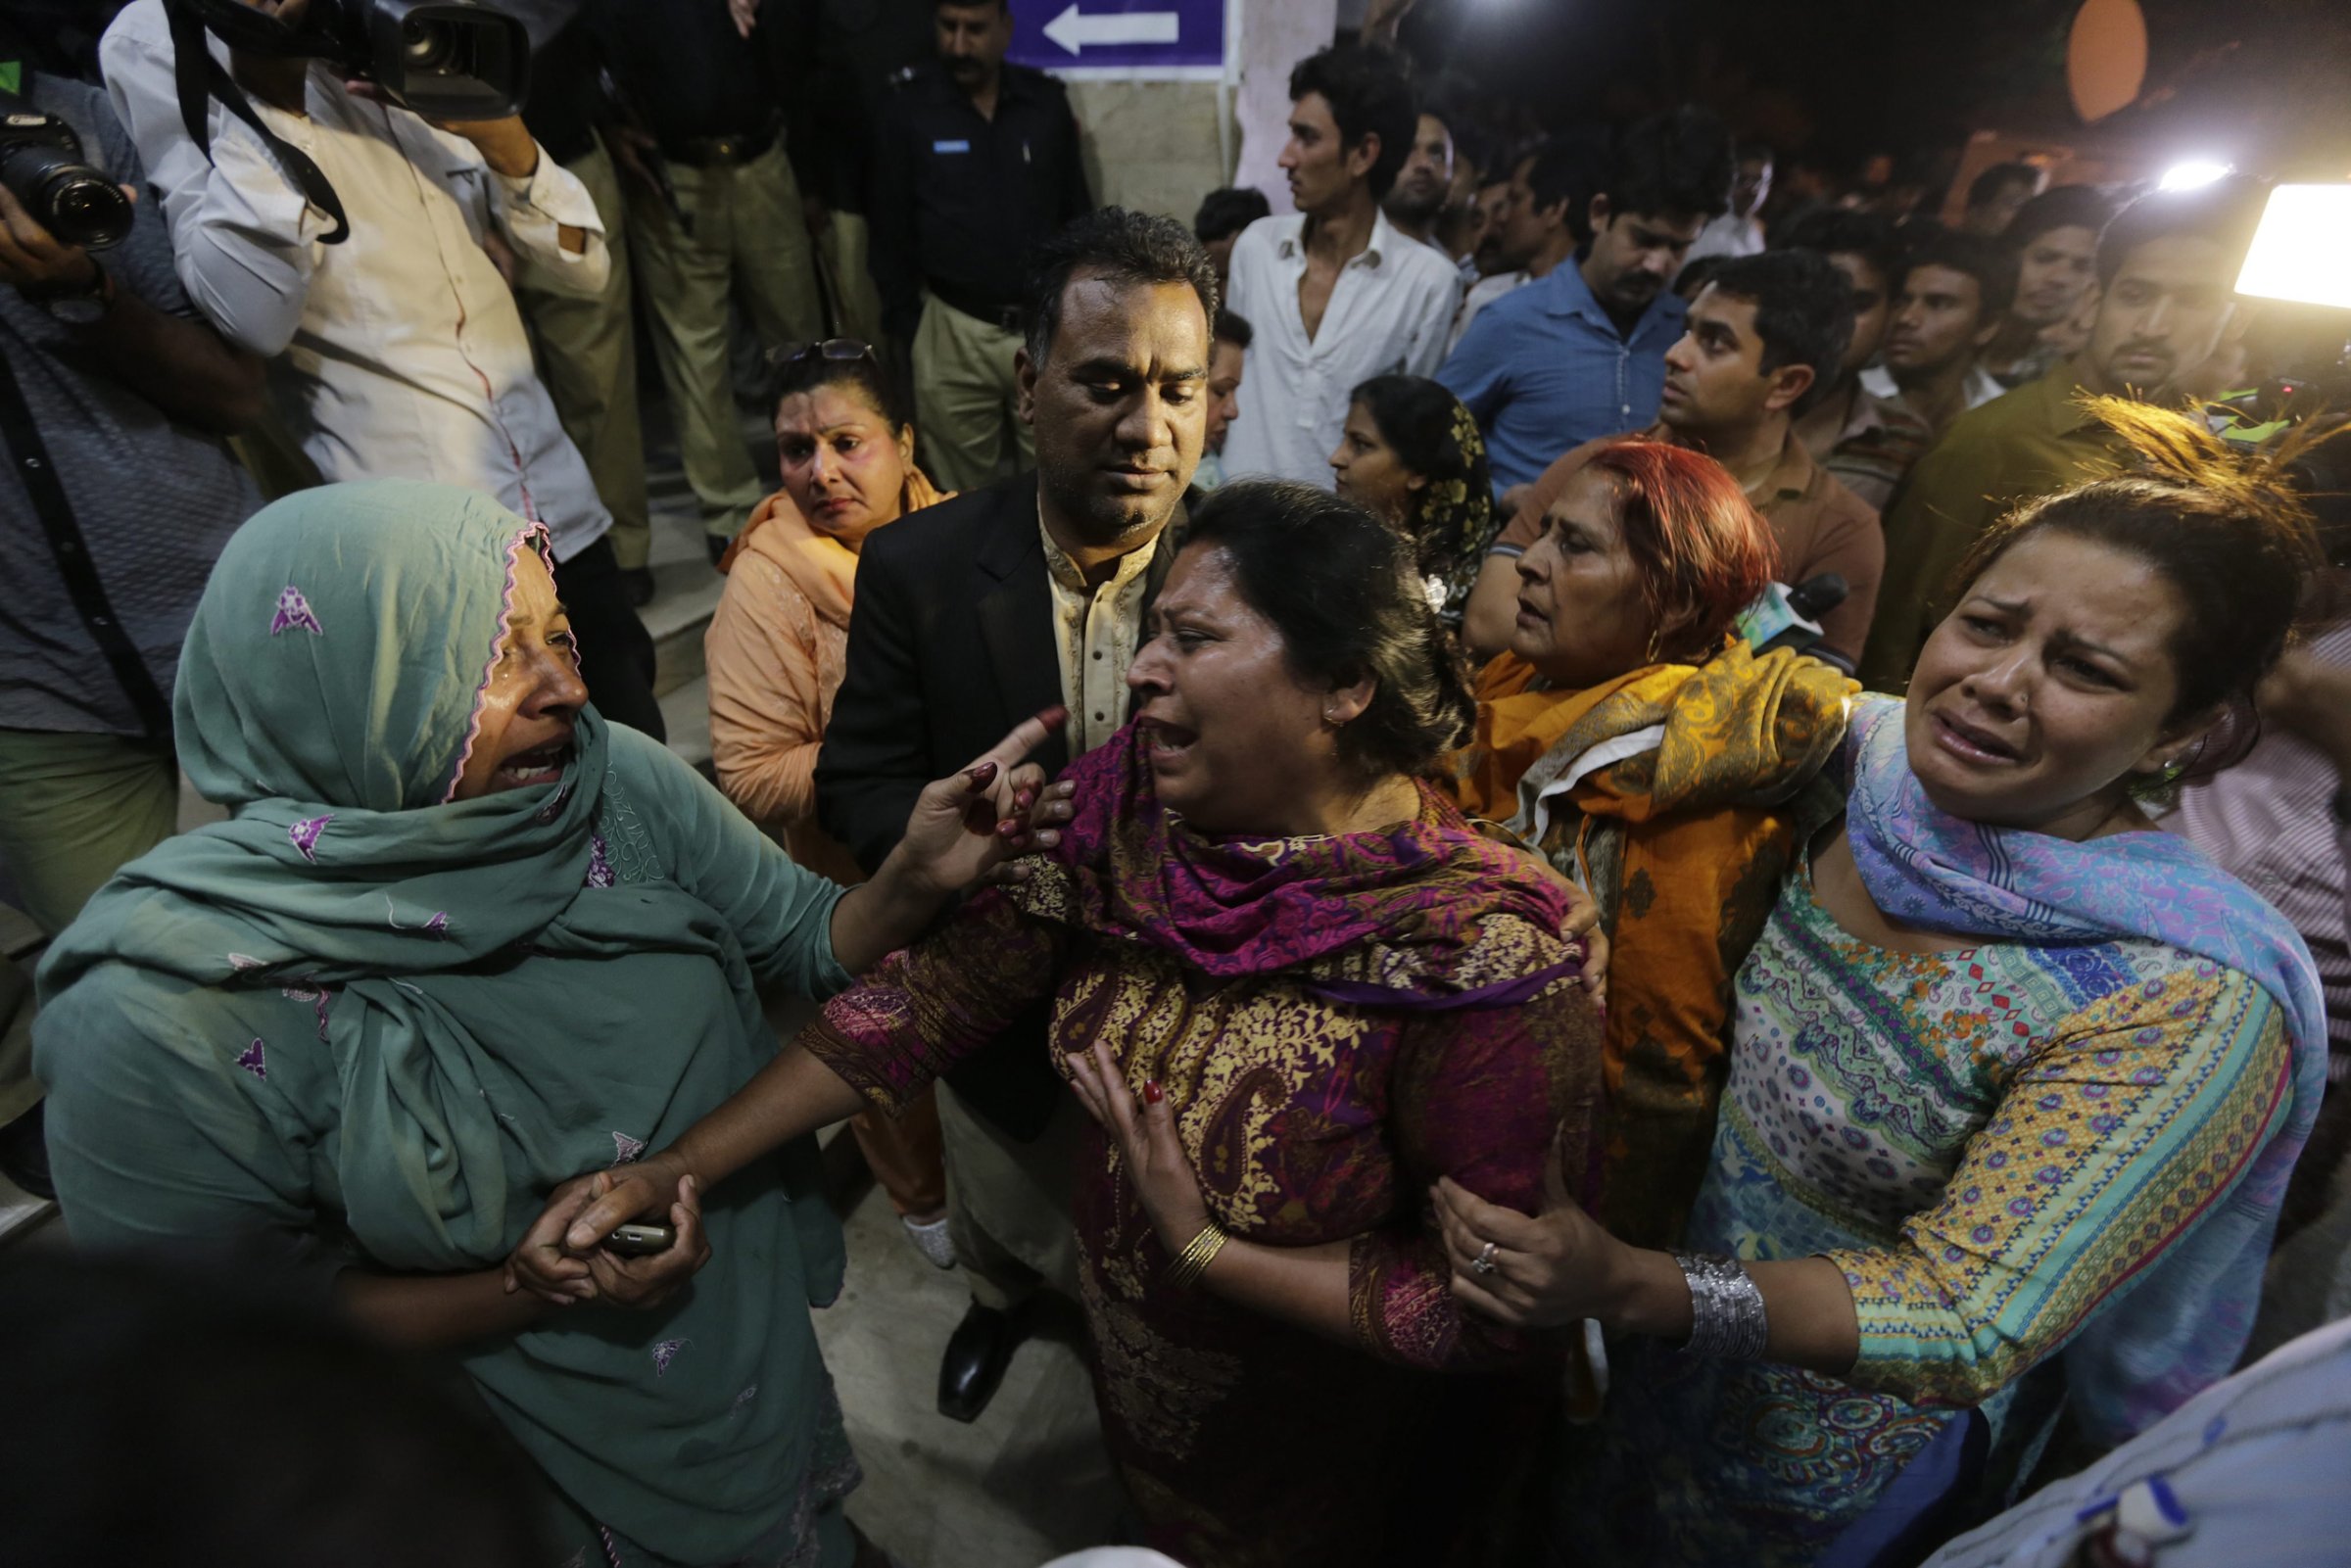 epa05232899 Relatives of the victims of a suicide bomb blast cry outside a hospital in Lahore, Pakistan, 27 March 2016. At least 52 people inlcuding women and children were killed while dozens injured in a suicide bomb attack that targeted a recreational park in Lahore. EPA/RAHAT DAR